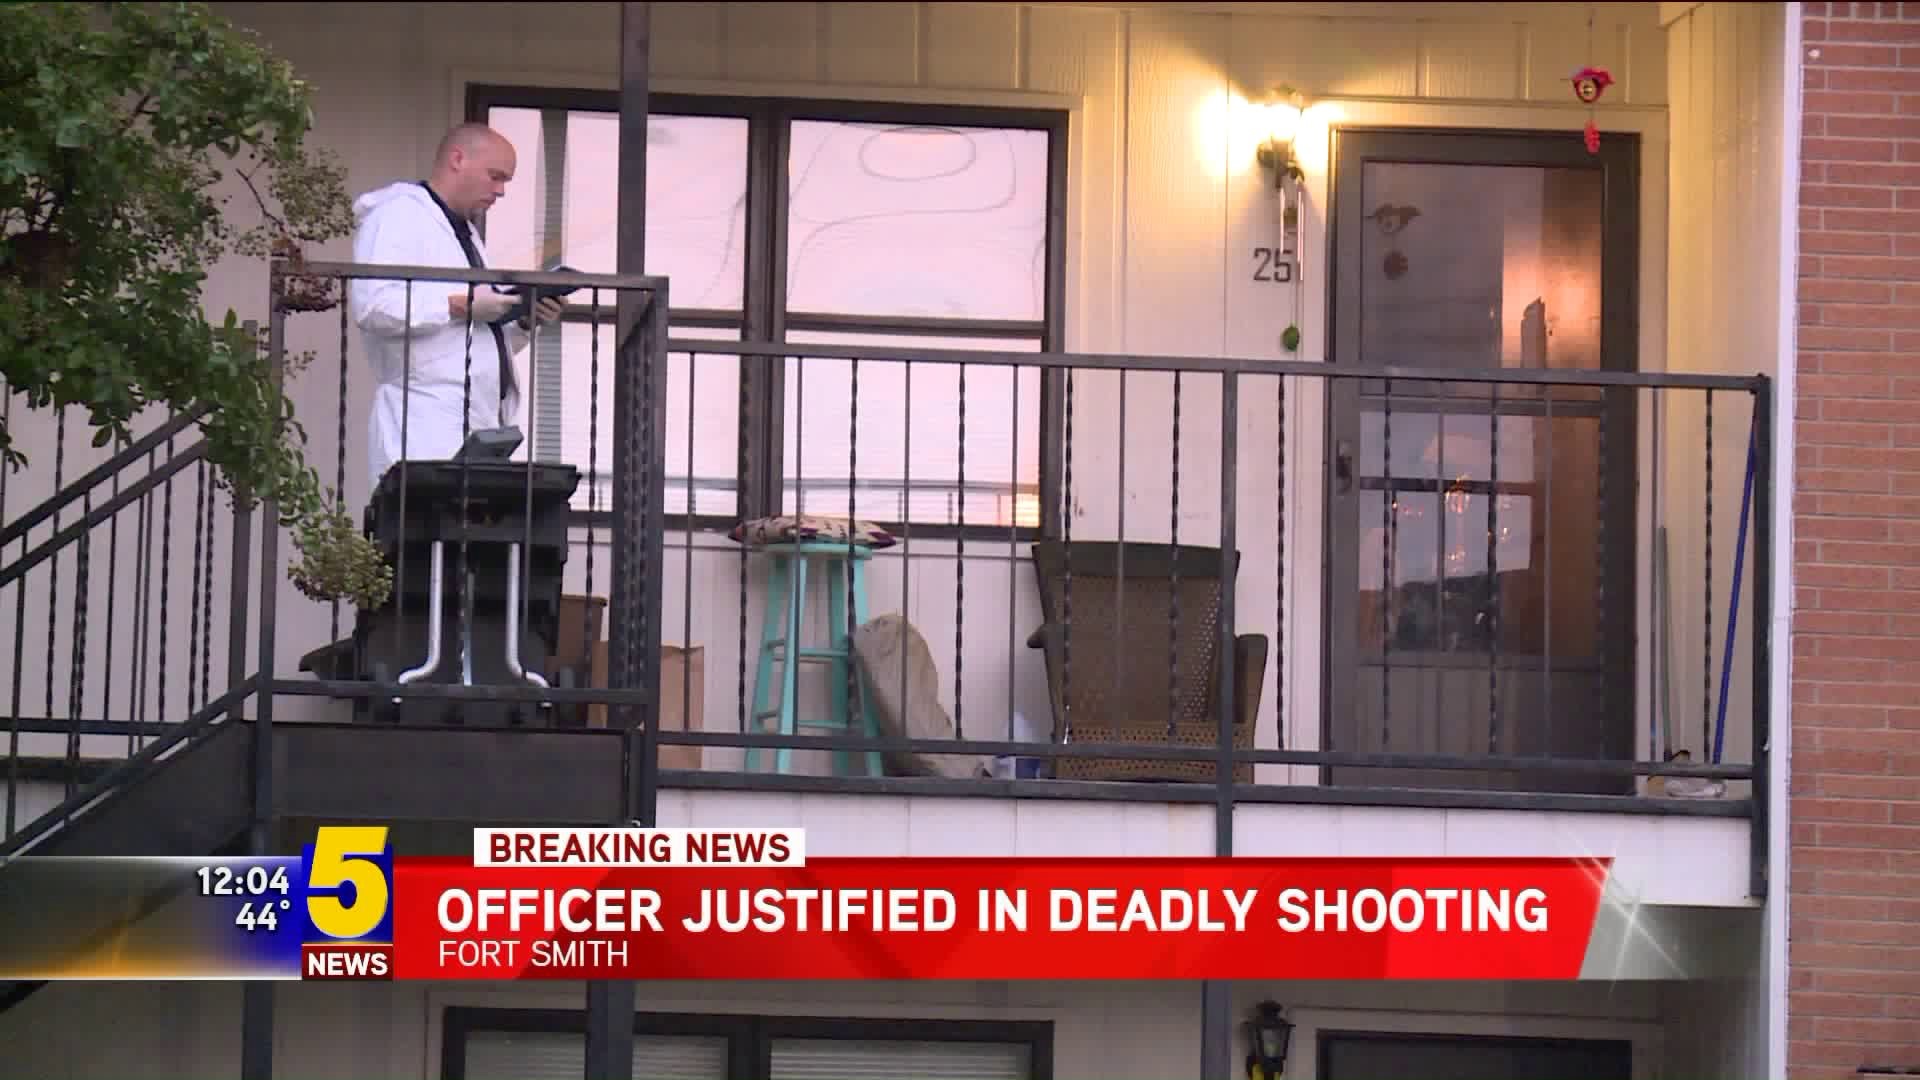 Officer Justified In Deadly Shooting in Fort Smith